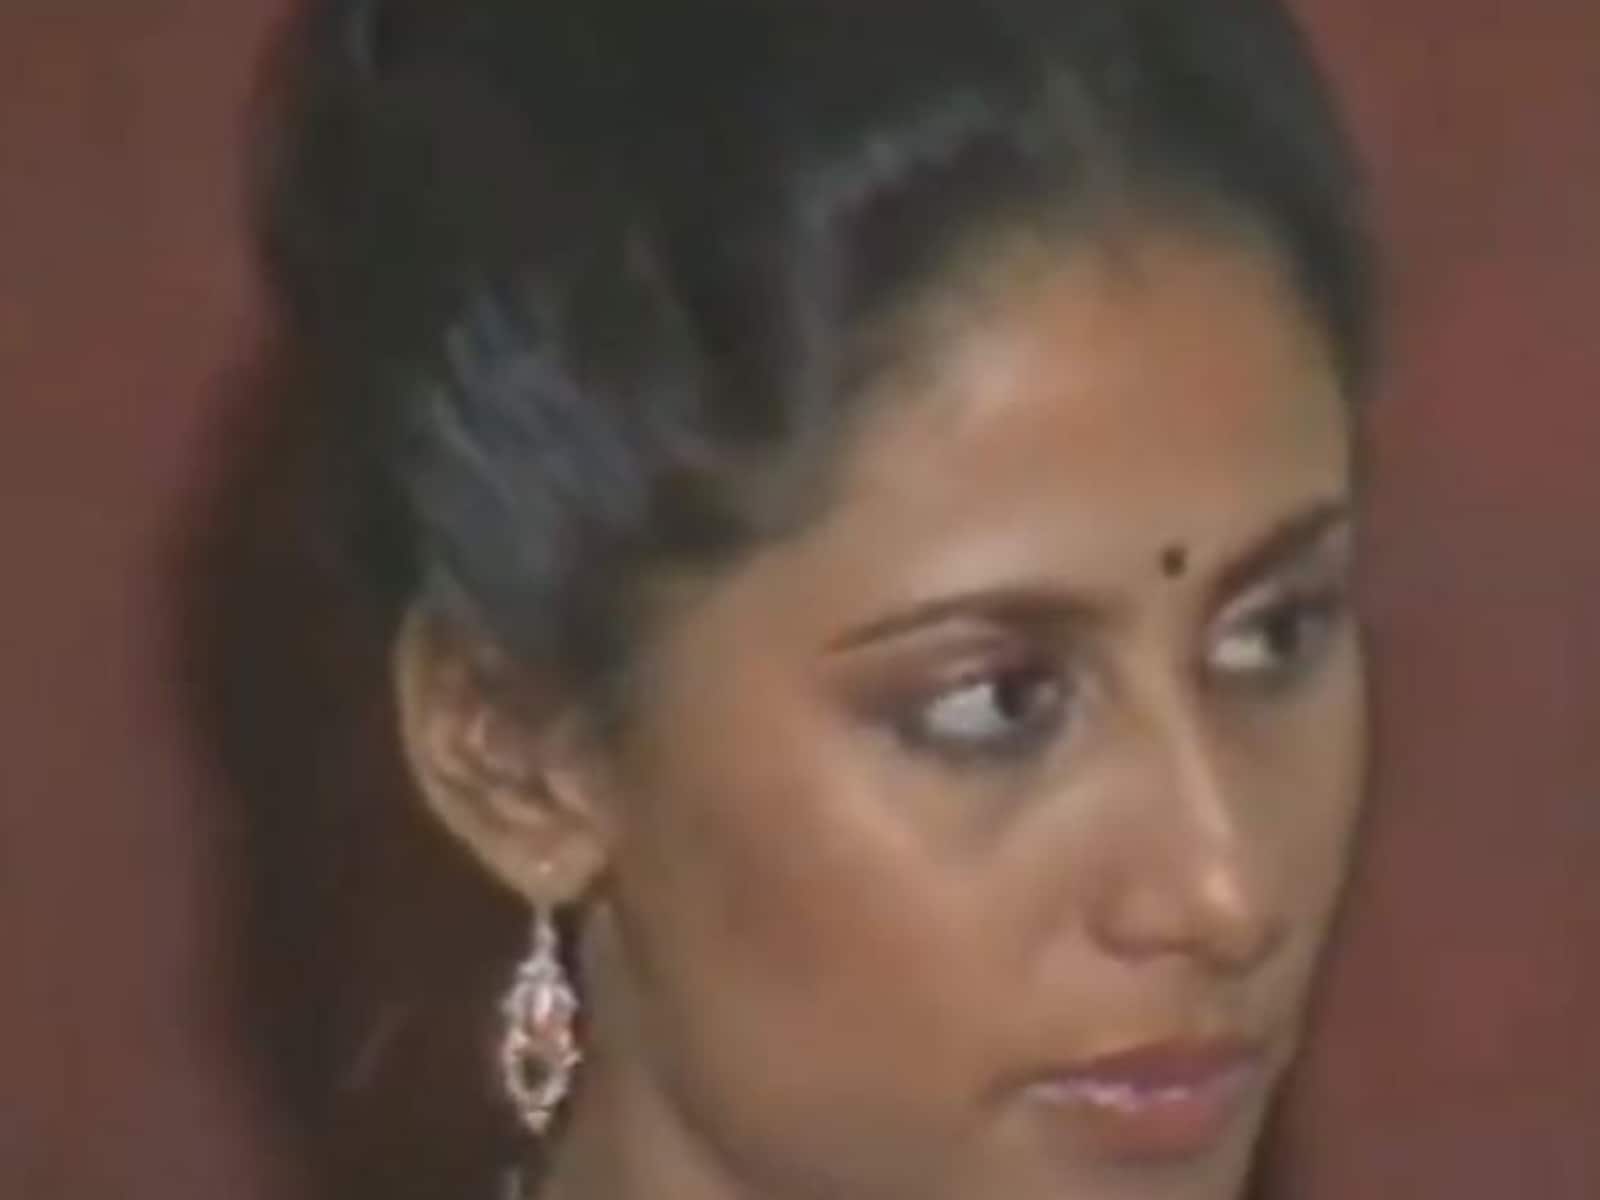 Porn Videos Of Smita Patil - Smita Patil's Old Interview on Objectification of Women to 'Sell Films' is  Still Relevant - News18